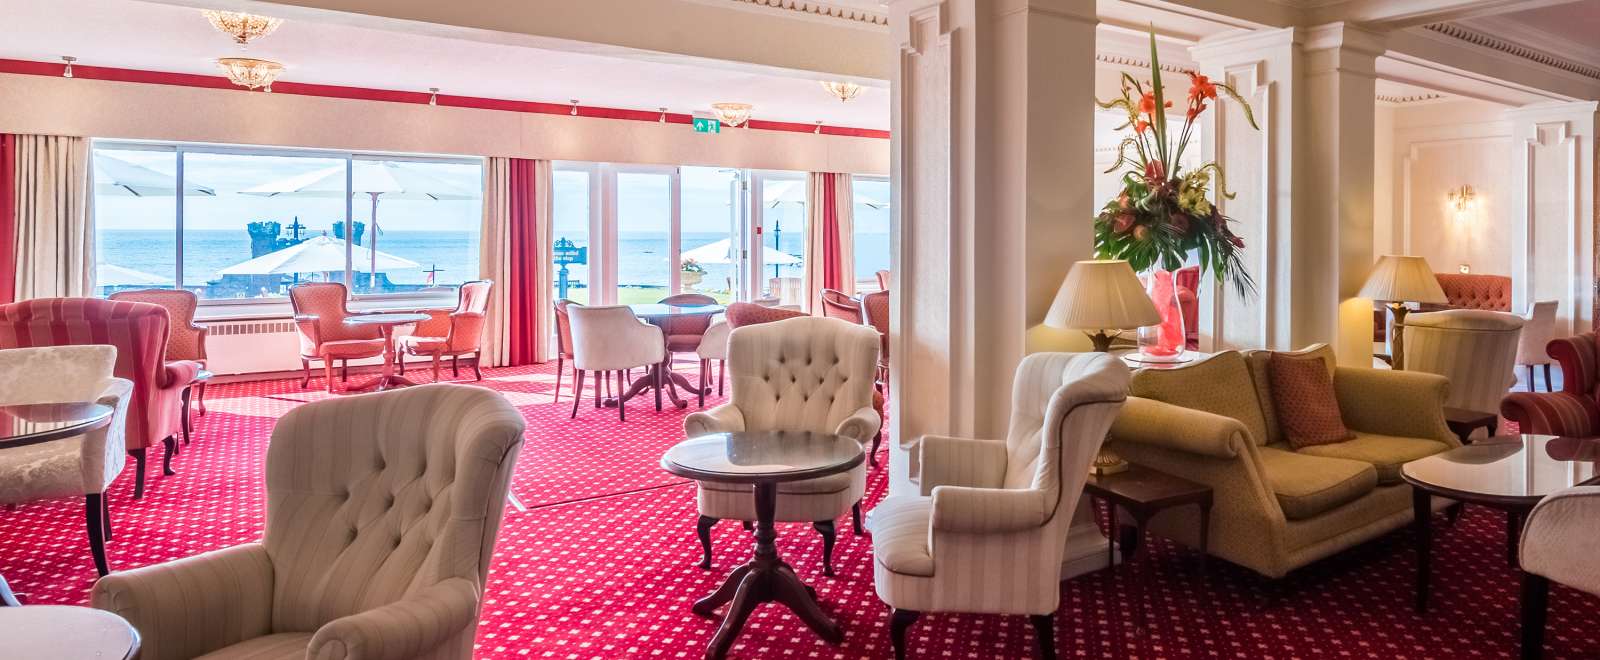 Victoria suite at the Belmont hotel with view of sea